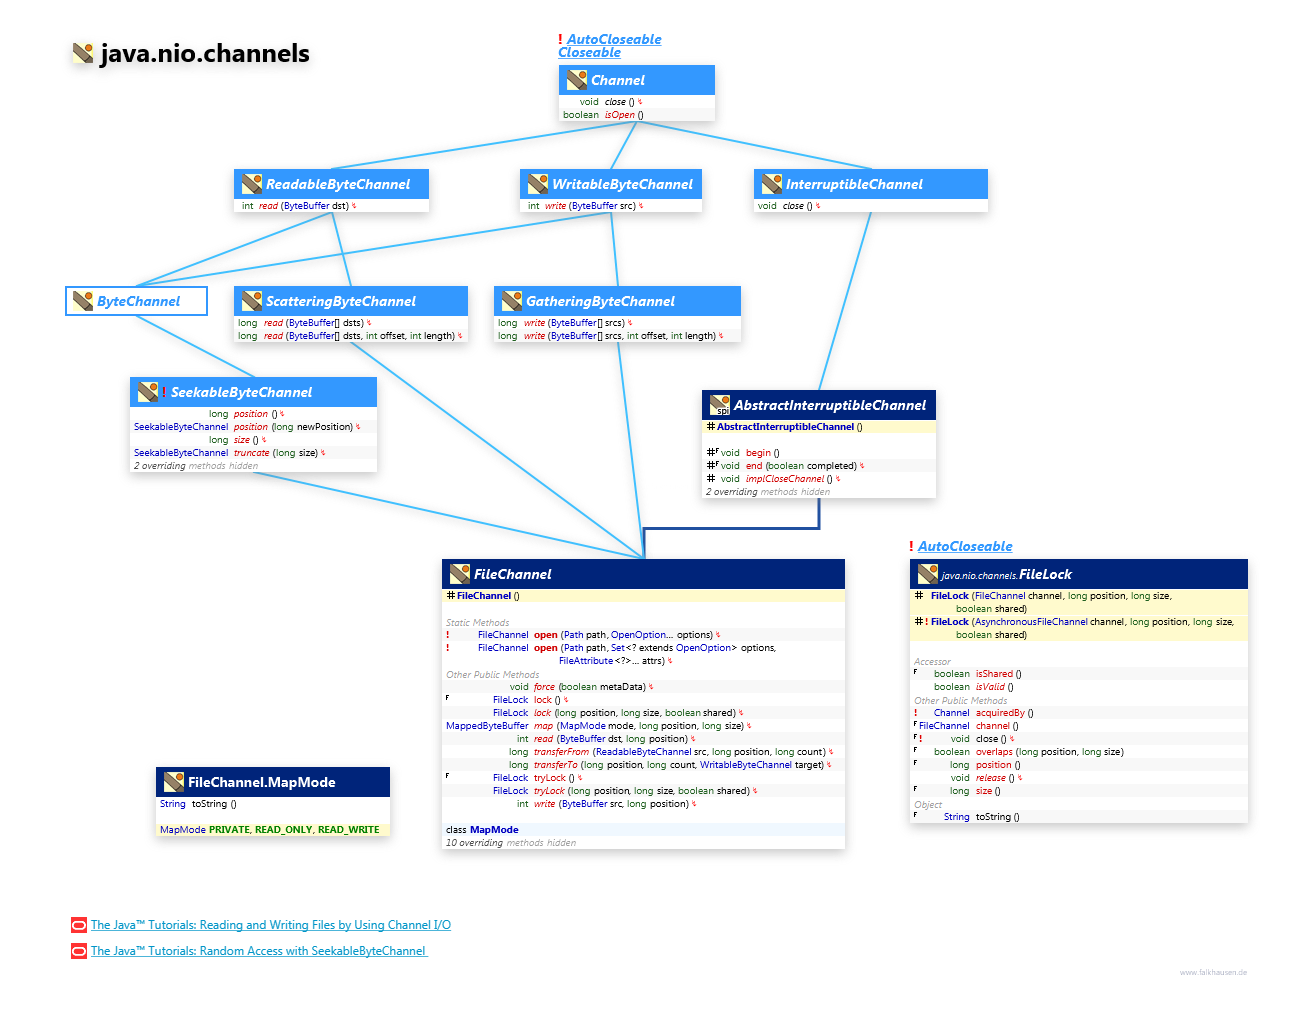 java.nio.channels FileChannel class diagram and api documentation for Java 7